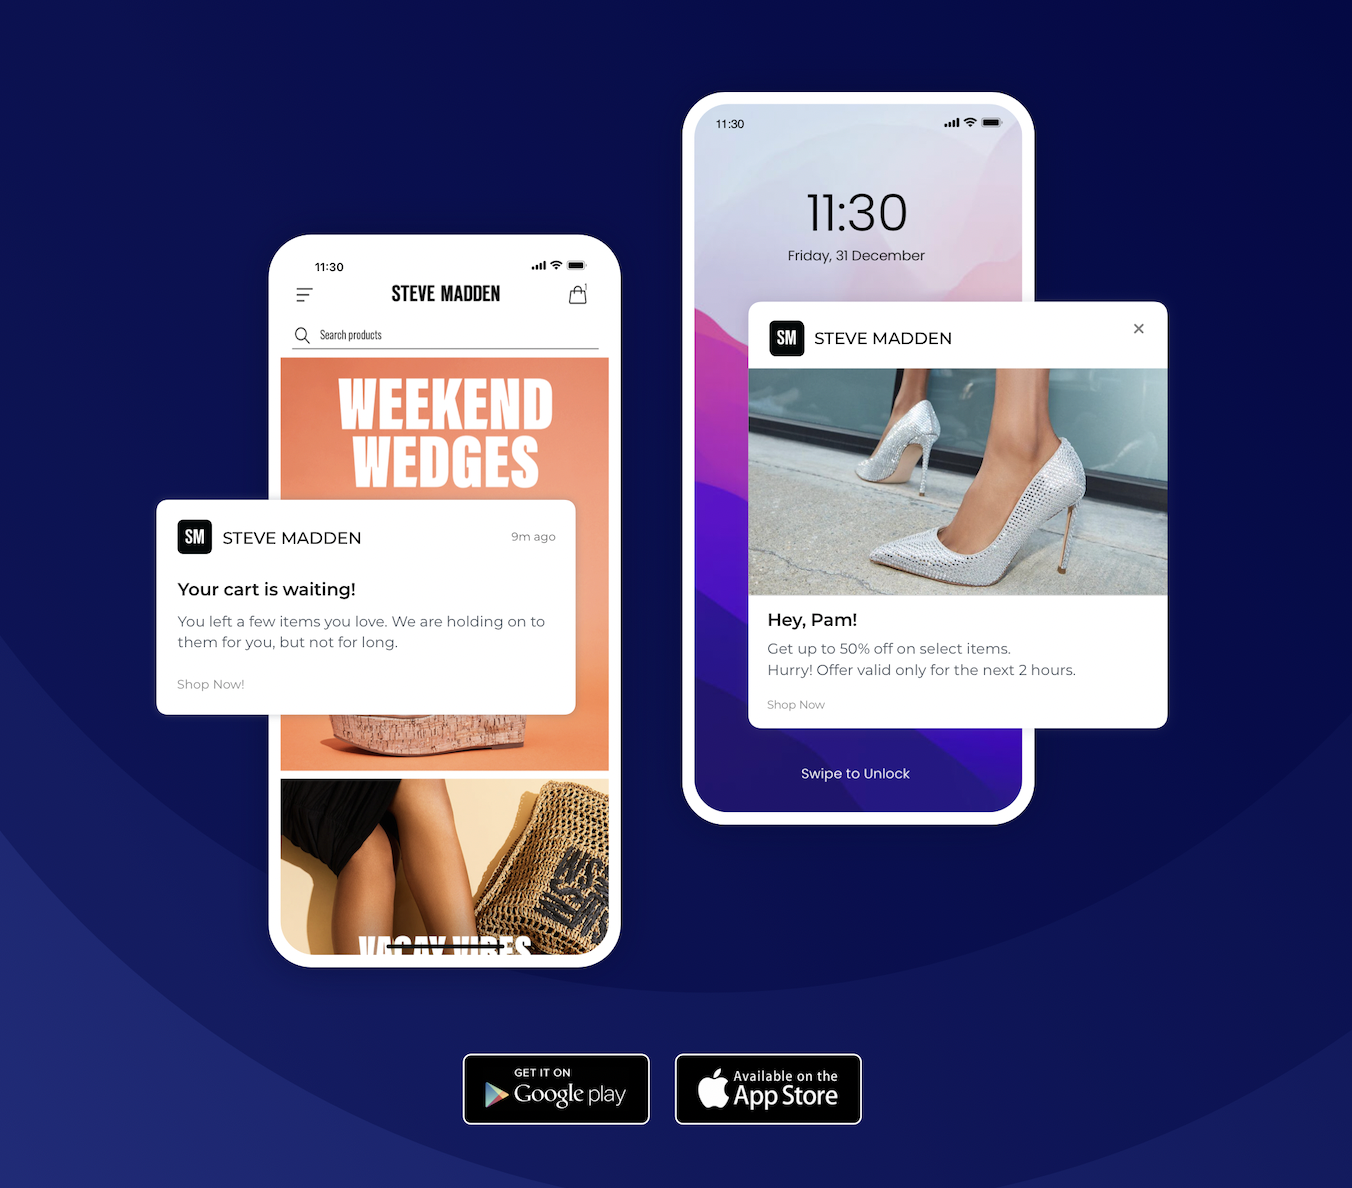 Push notifications preview by the brand Steve Madden